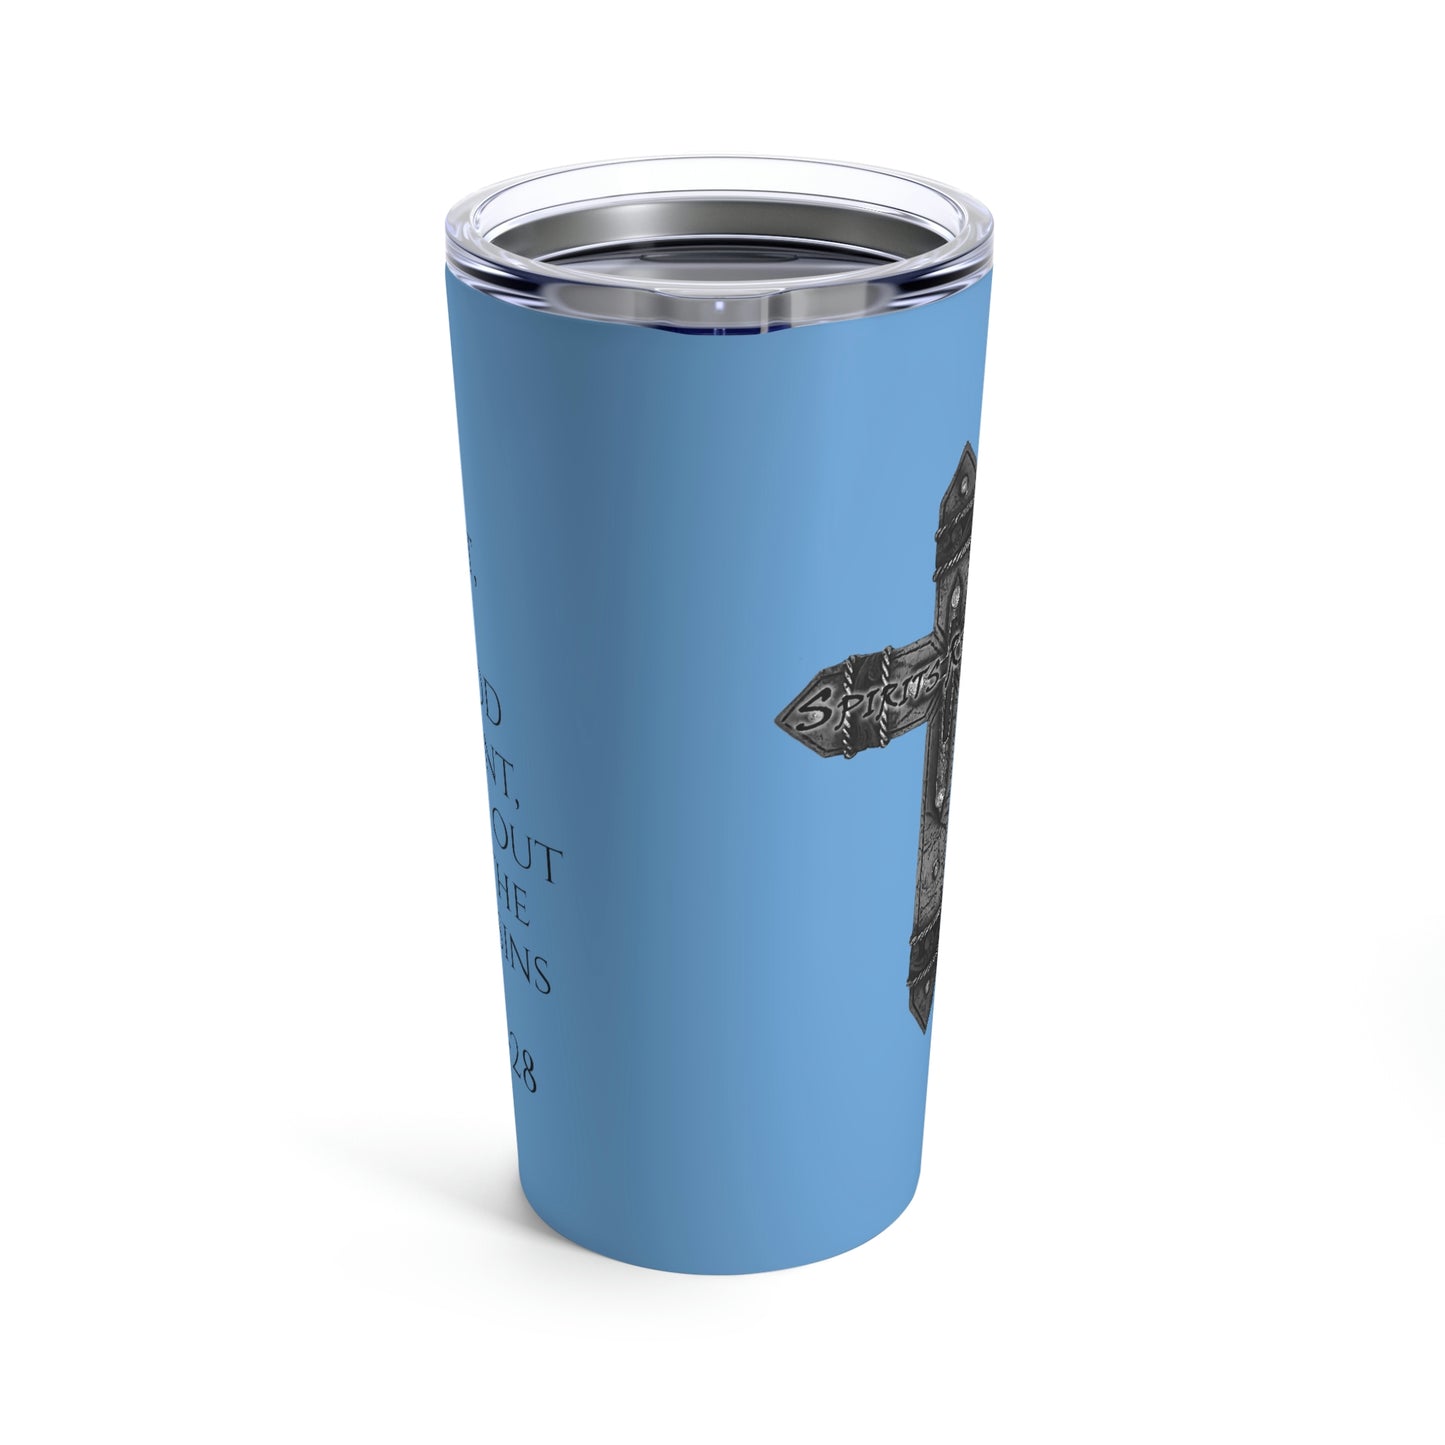 Drink From it - 20oz Tumbler